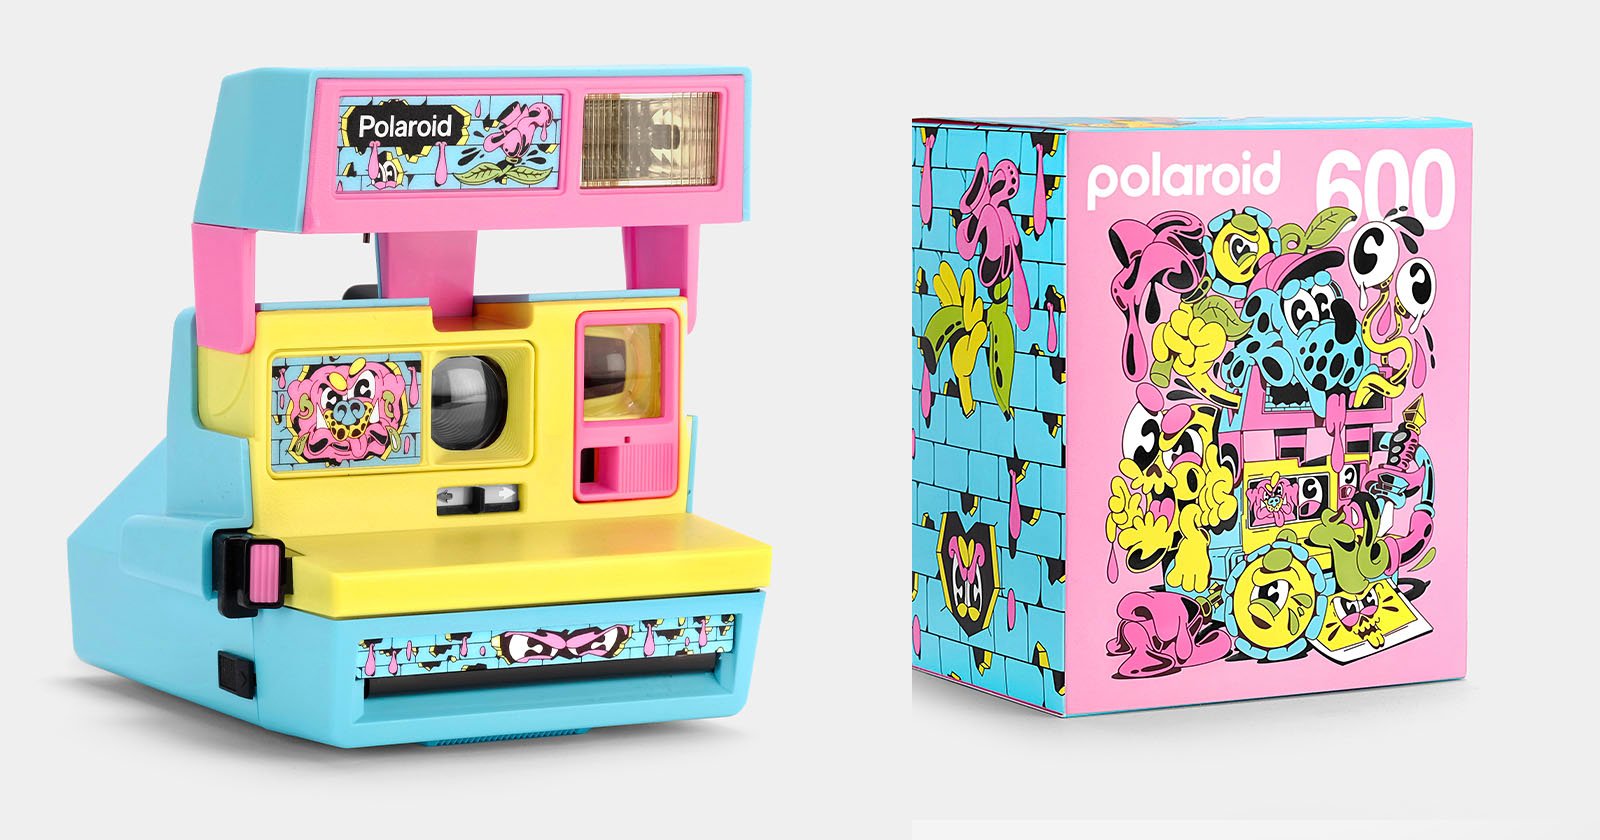 This Polaroid 600 is Emblazoned with the Artwork of Evan Weselmann